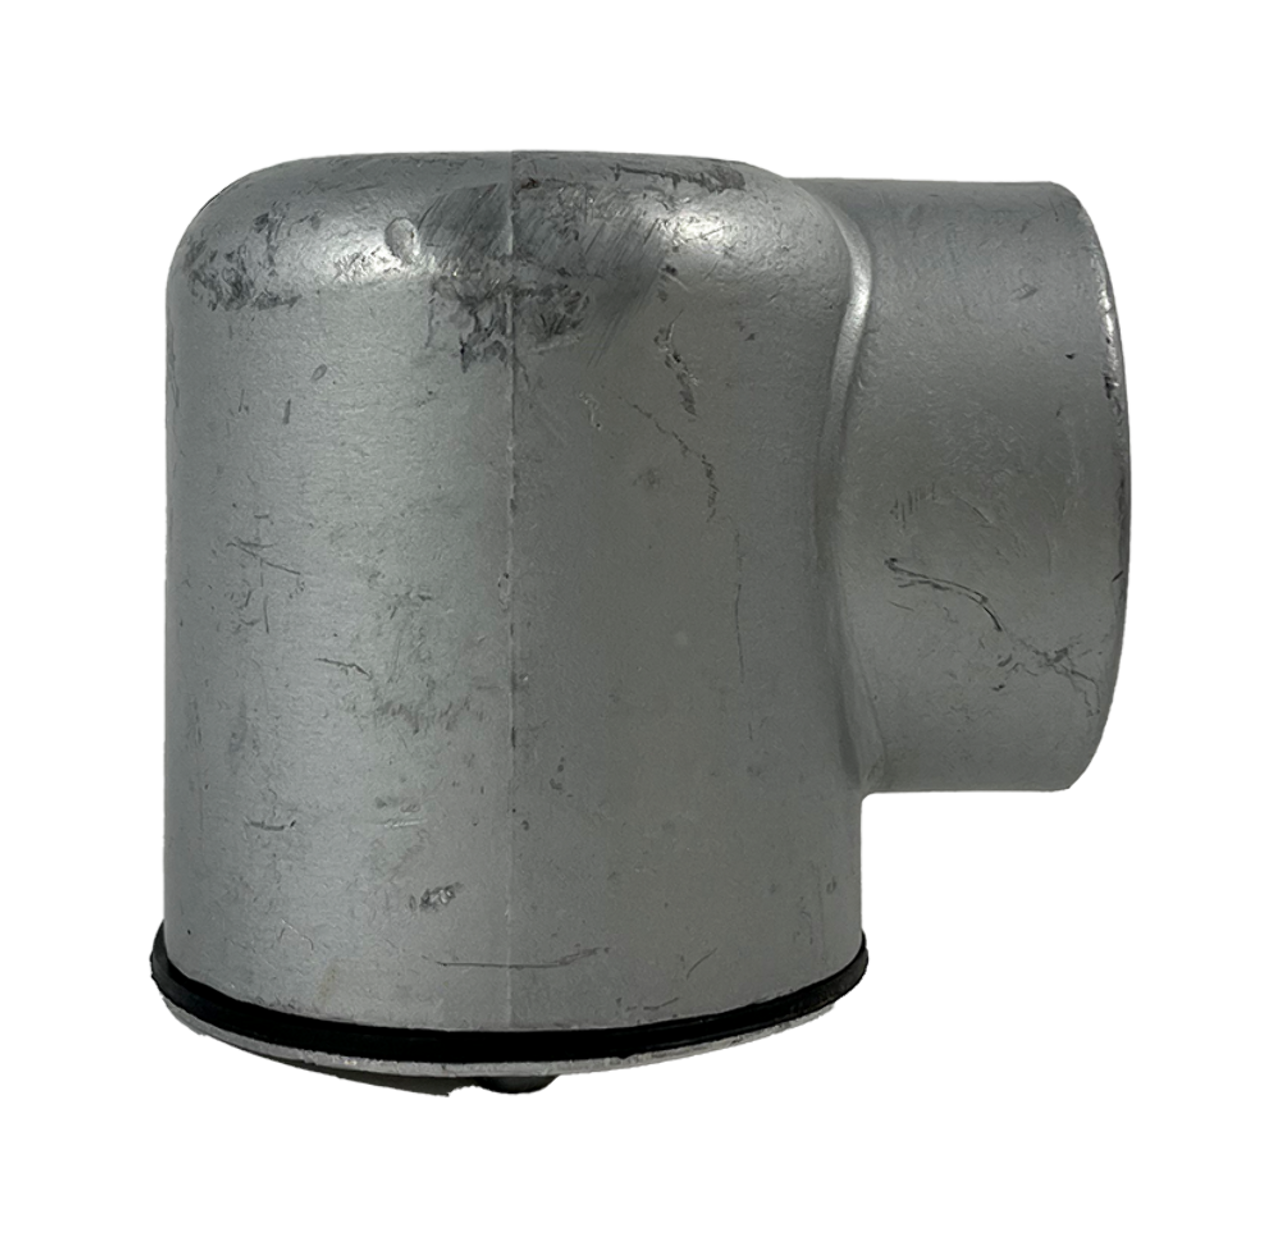 Appleton LL200-A Conduit Body 2 Inch LL Form 85 Unilet Aluminum W/Cover and Gasket